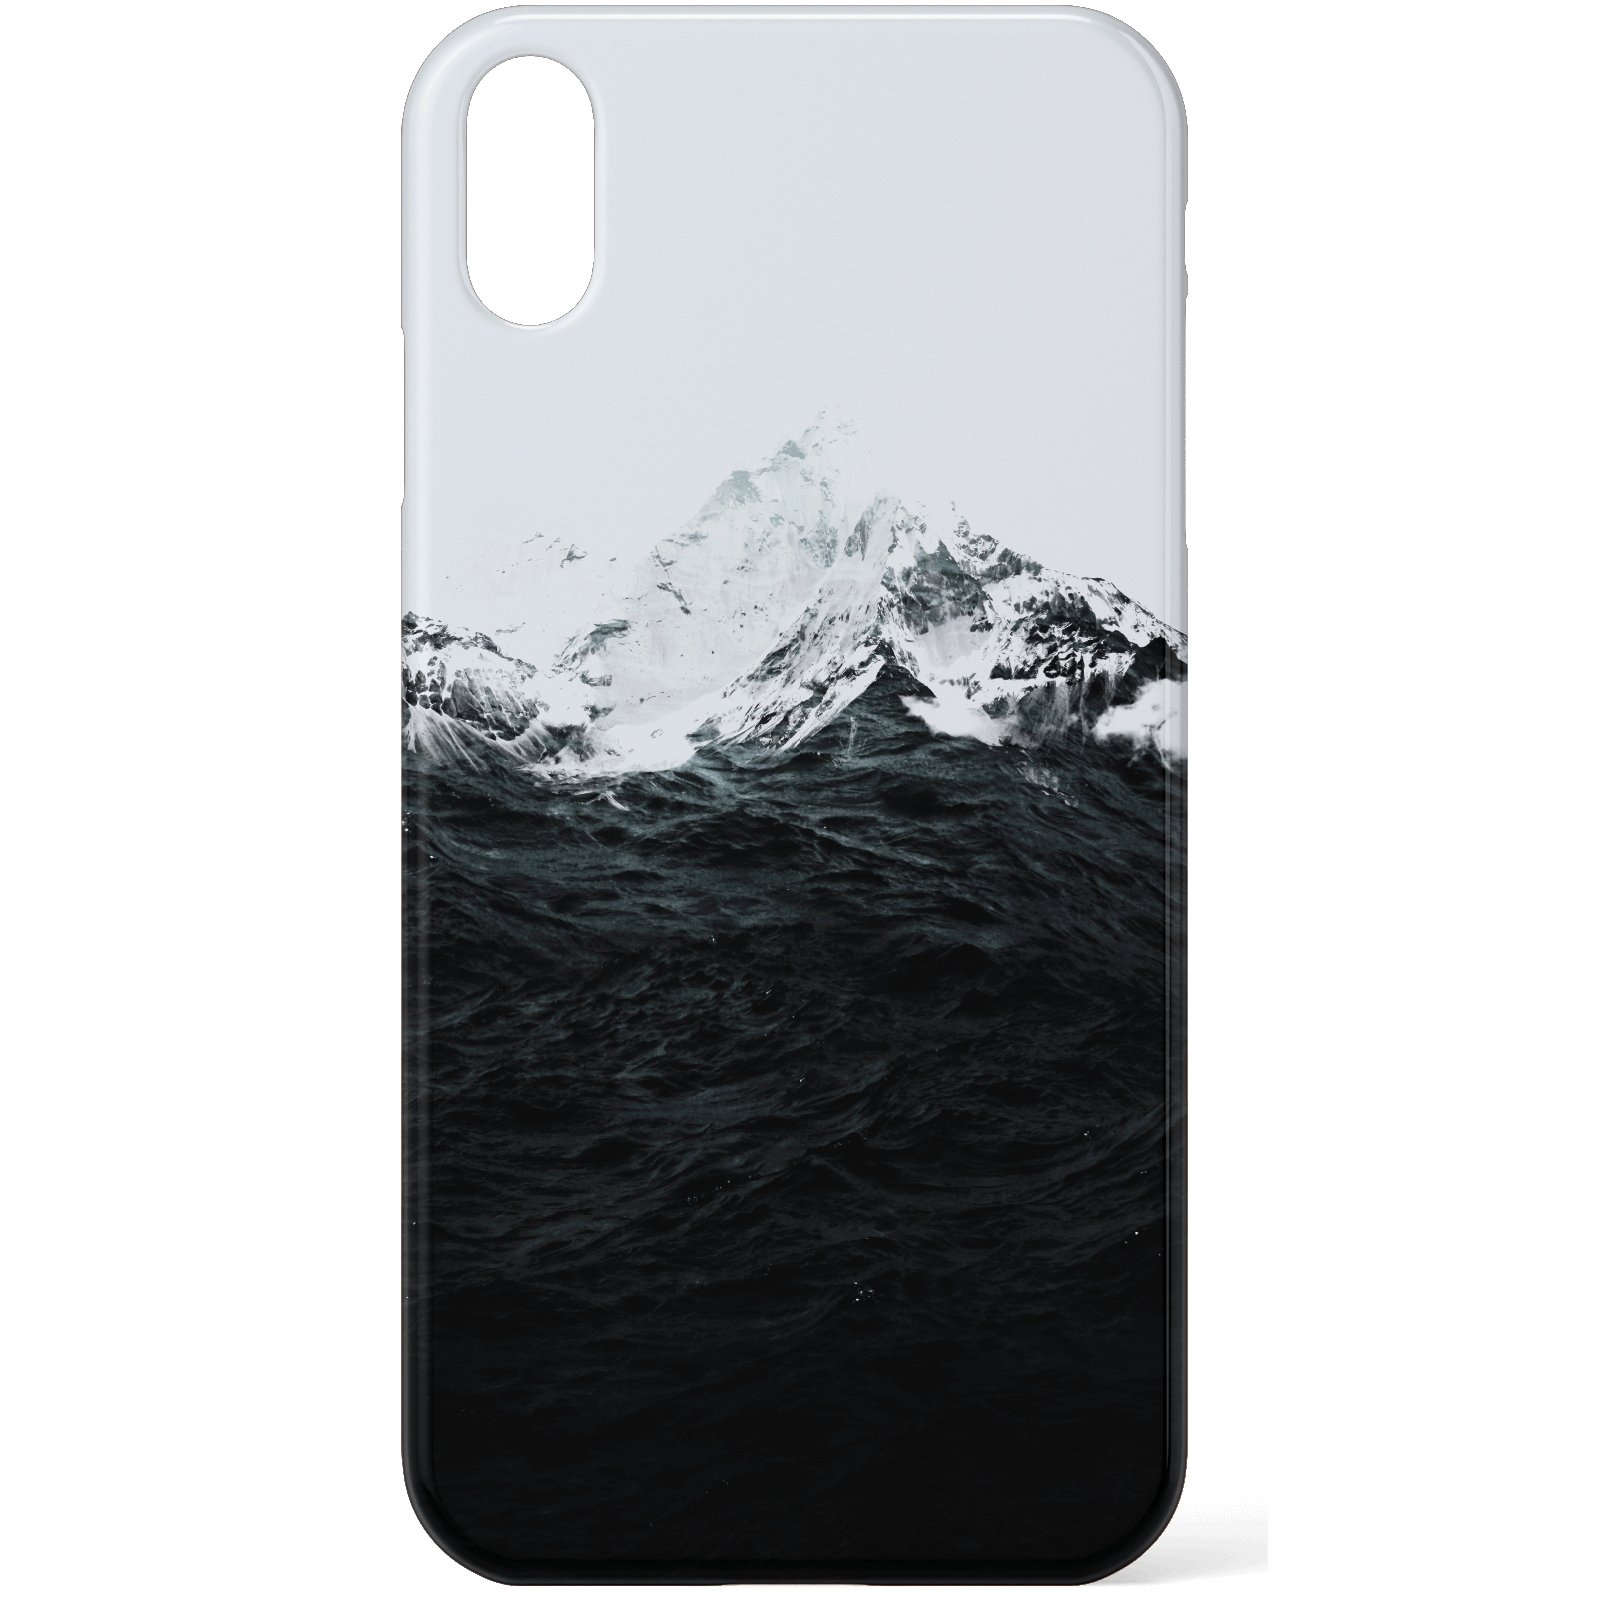 Those Waves Were Like Mountains Phone Case for iPhone and Android - iPhone 7 Plus - Tough Case - Gloss